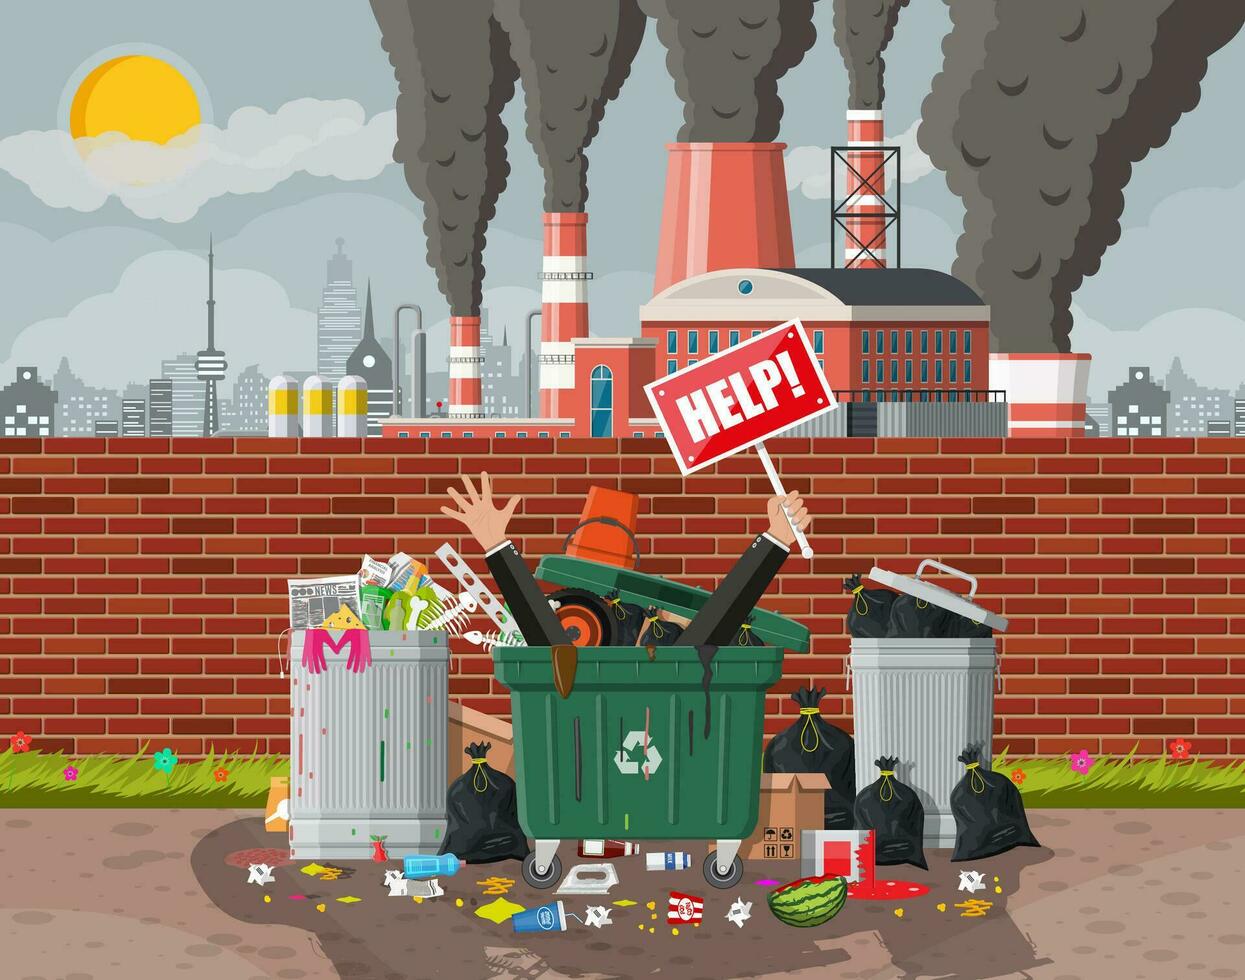 Plant smoking pipes. Smog in city. Trash emission from factory. Environmental disaster. Garbage bin full of trash. Environmental pollution ecology nature. Vector illustration flat style